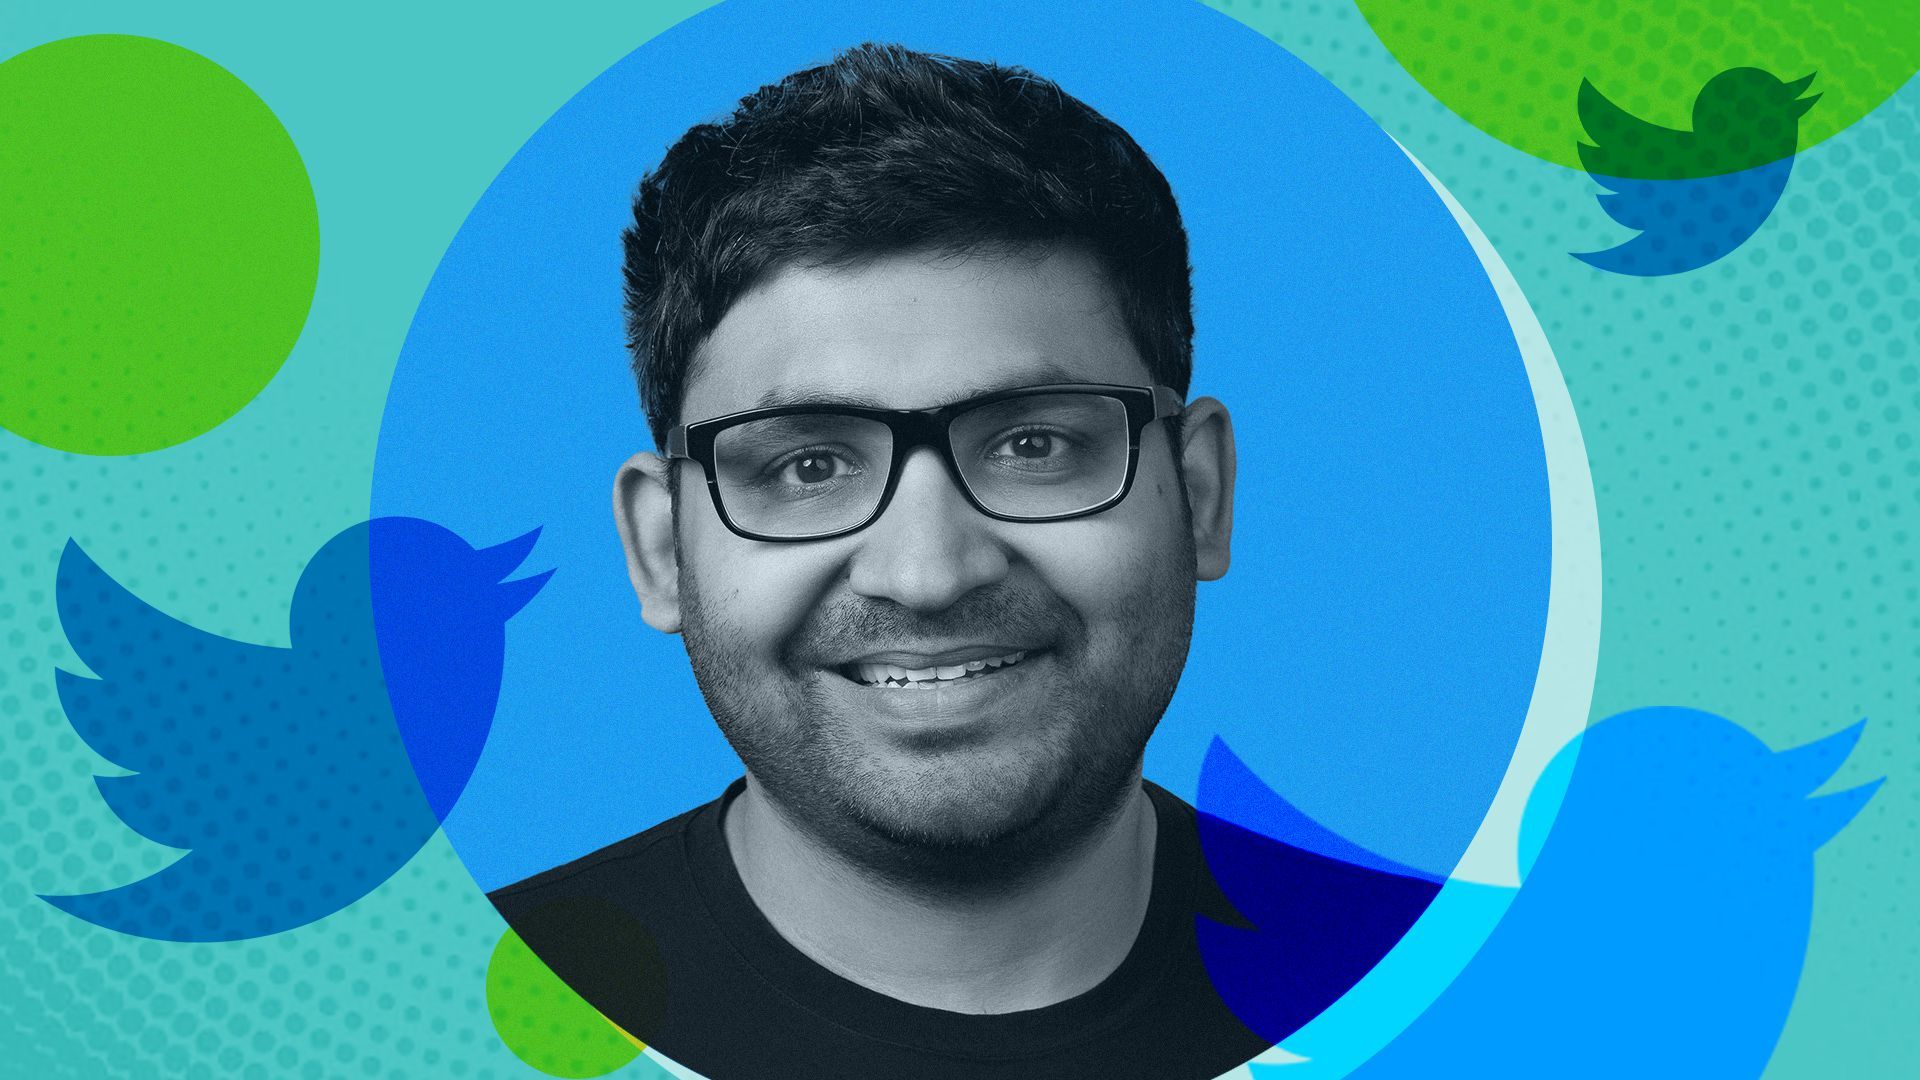 Photo illustration of Parag Agrawal, CEO of Twitter, surrouded by the Twitter logo and abstract shapes.